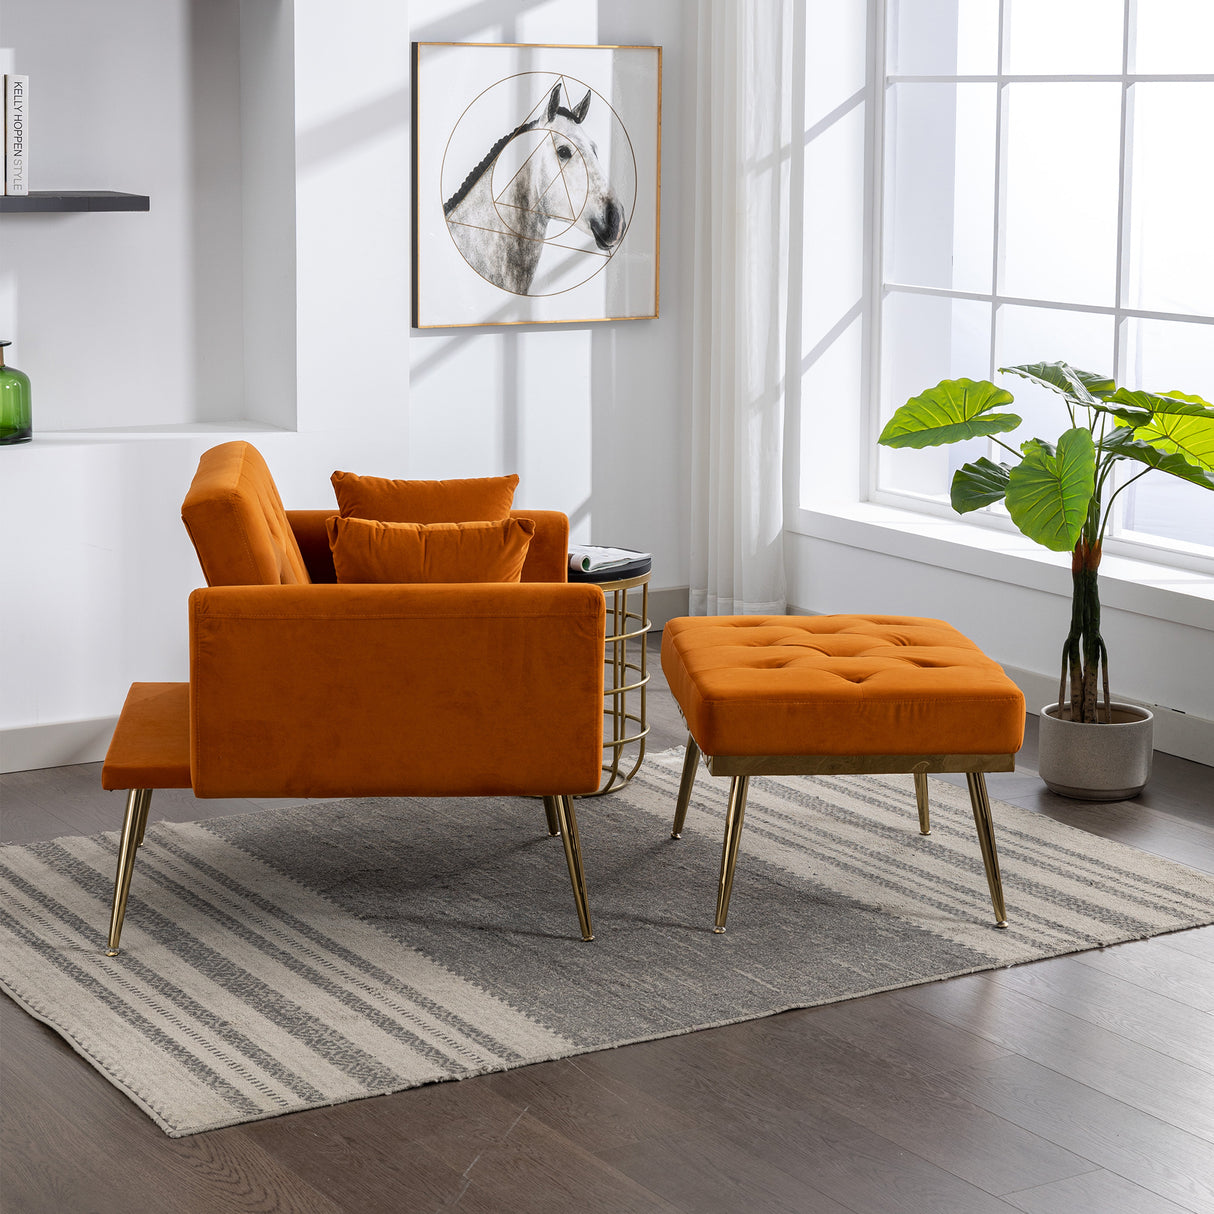 36.61'' Wide Modern Accent Chair With 3 Positions Adjustable Backrest, Tufted Chaise Lounge Chair, Single Recliner Armchair With Ottoman And Gold Legs For Living Room, Bedroom (Orange) - Home Elegance USA